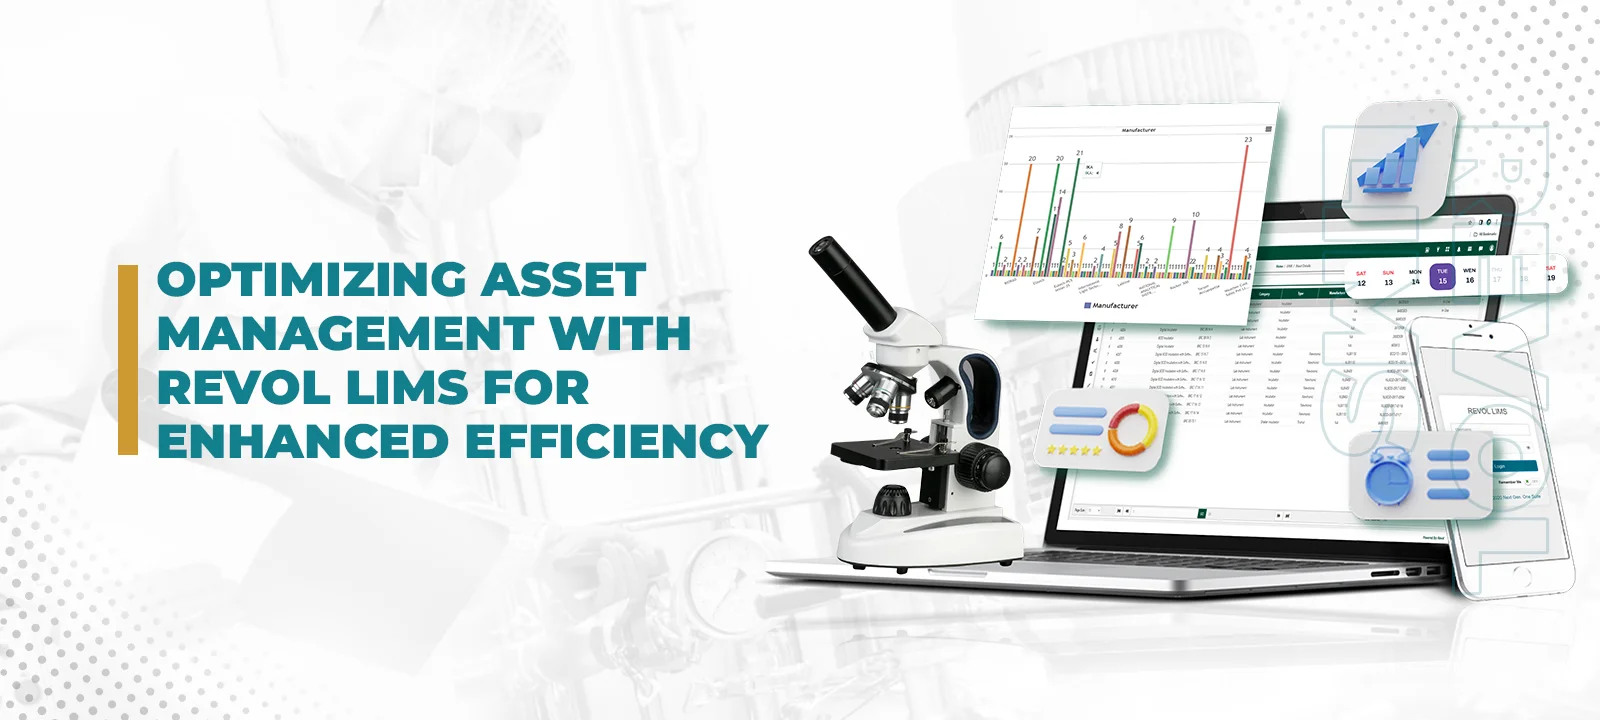 A banner with text Optimizing Asset Management with Revol LIMS and images of various assets and data used in laboratory management.